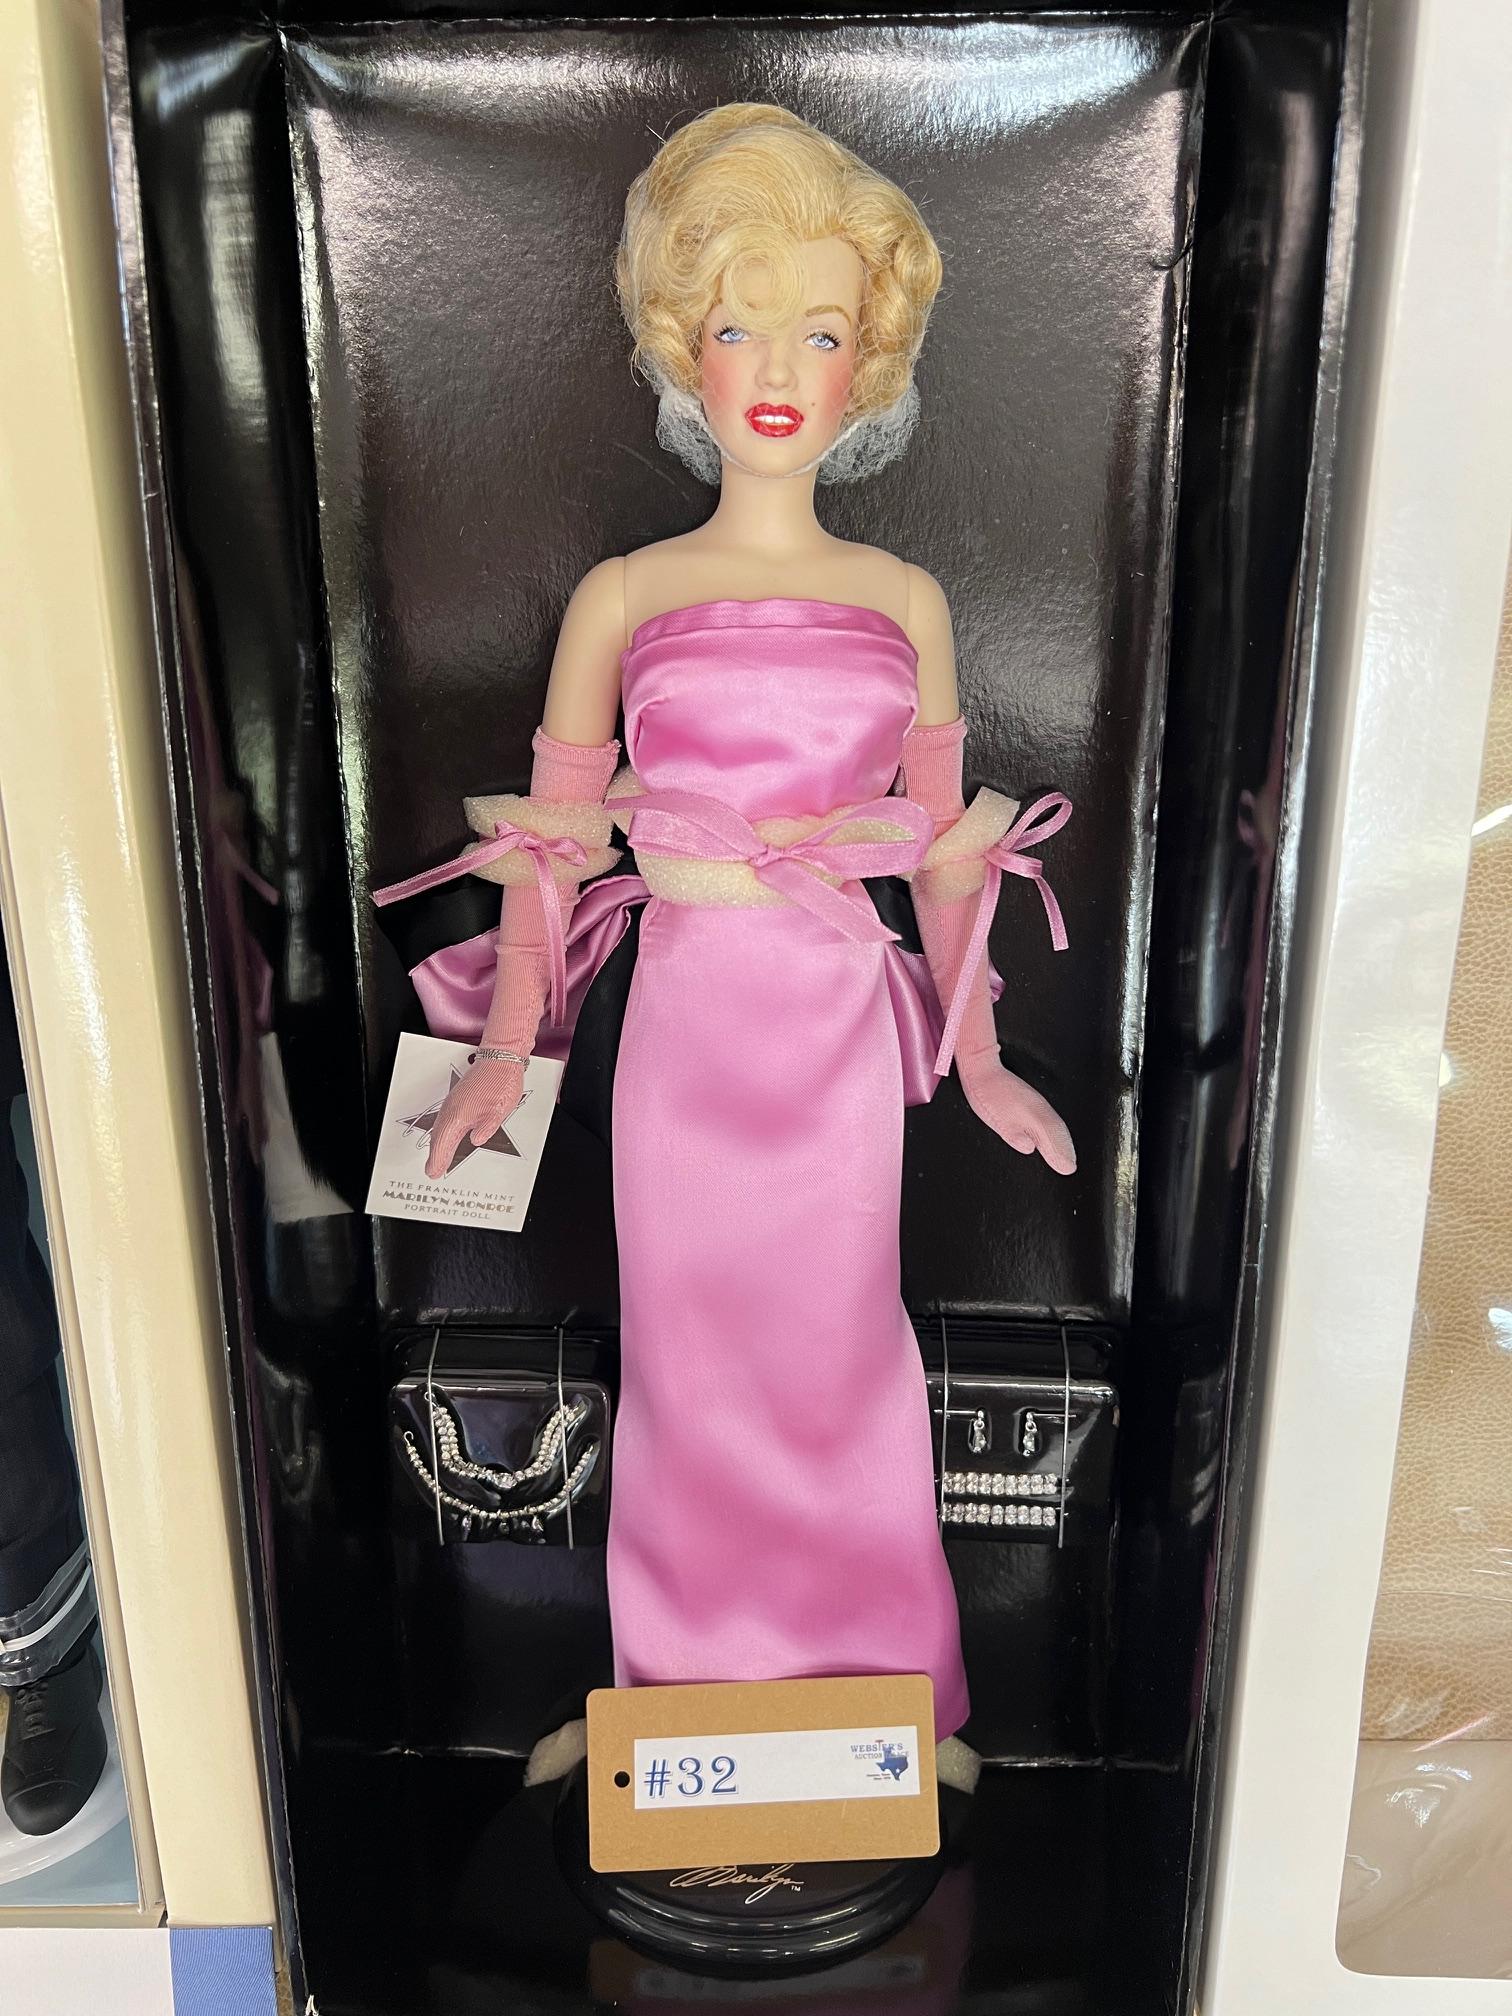 2PC FRANKLIN MINT JFK AND MARILYN MONROE DOLLS IN BOXES